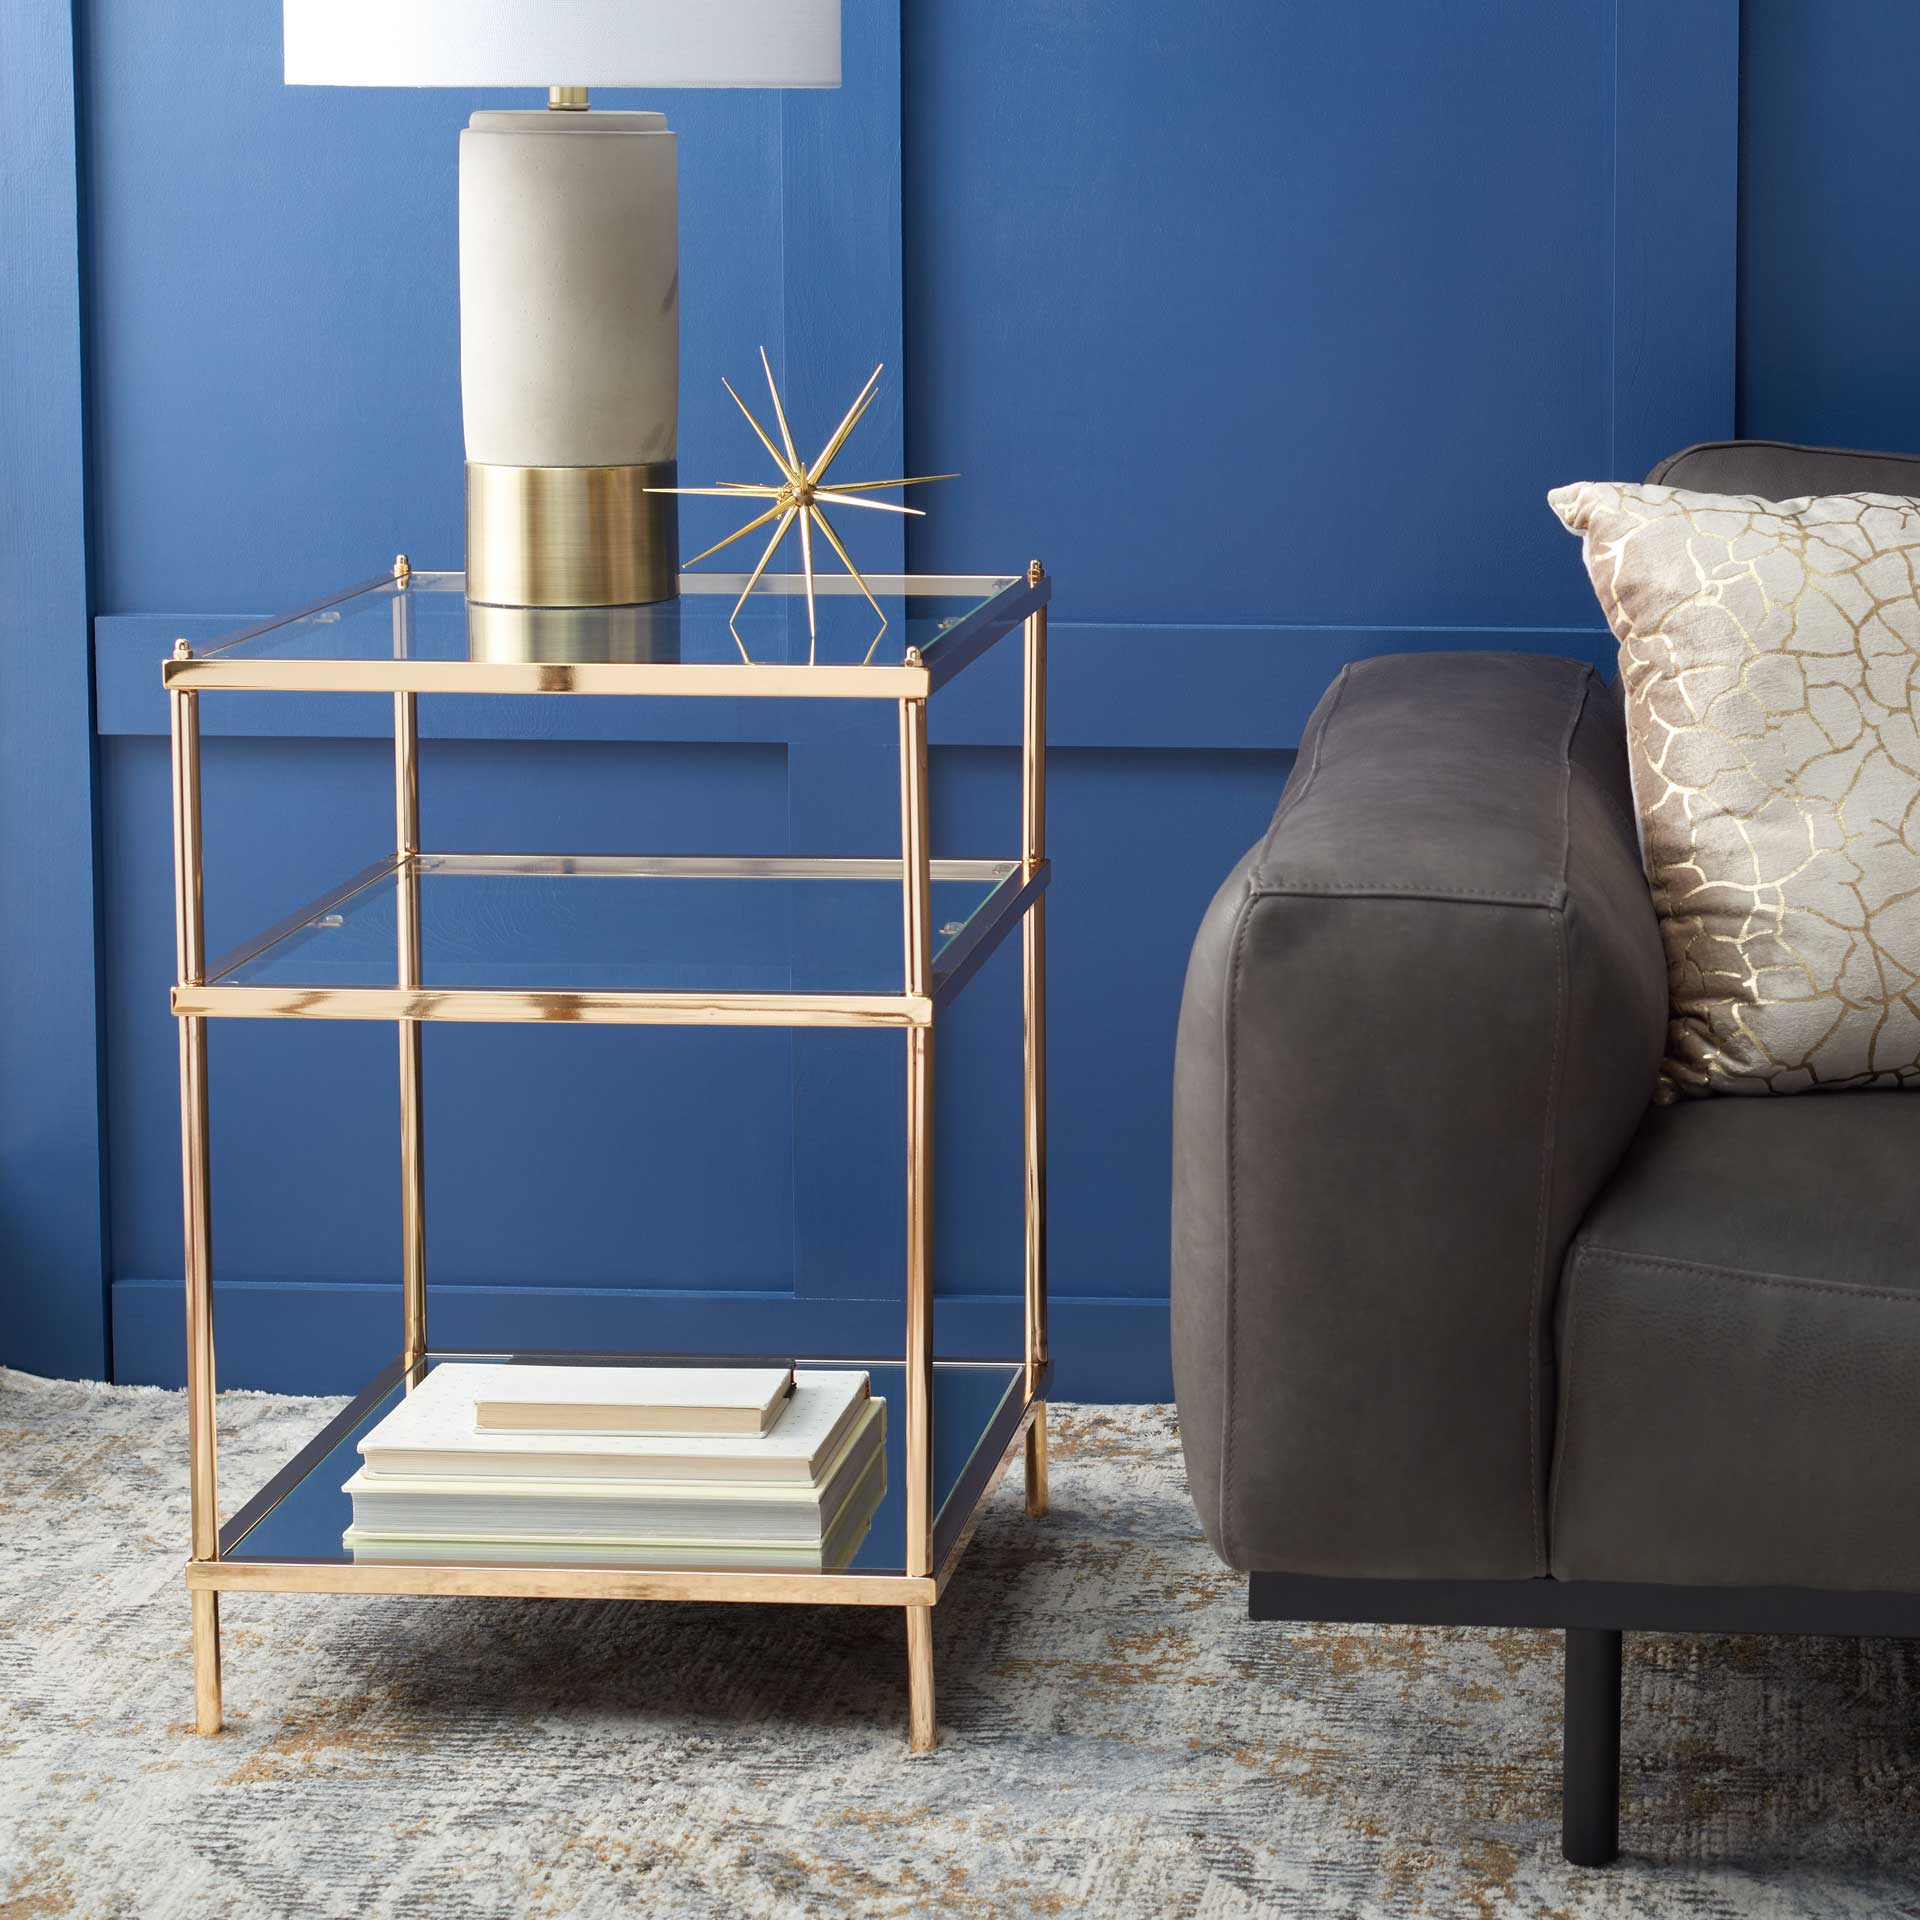 Noah 3 Tier Accent Table Gold/Glass